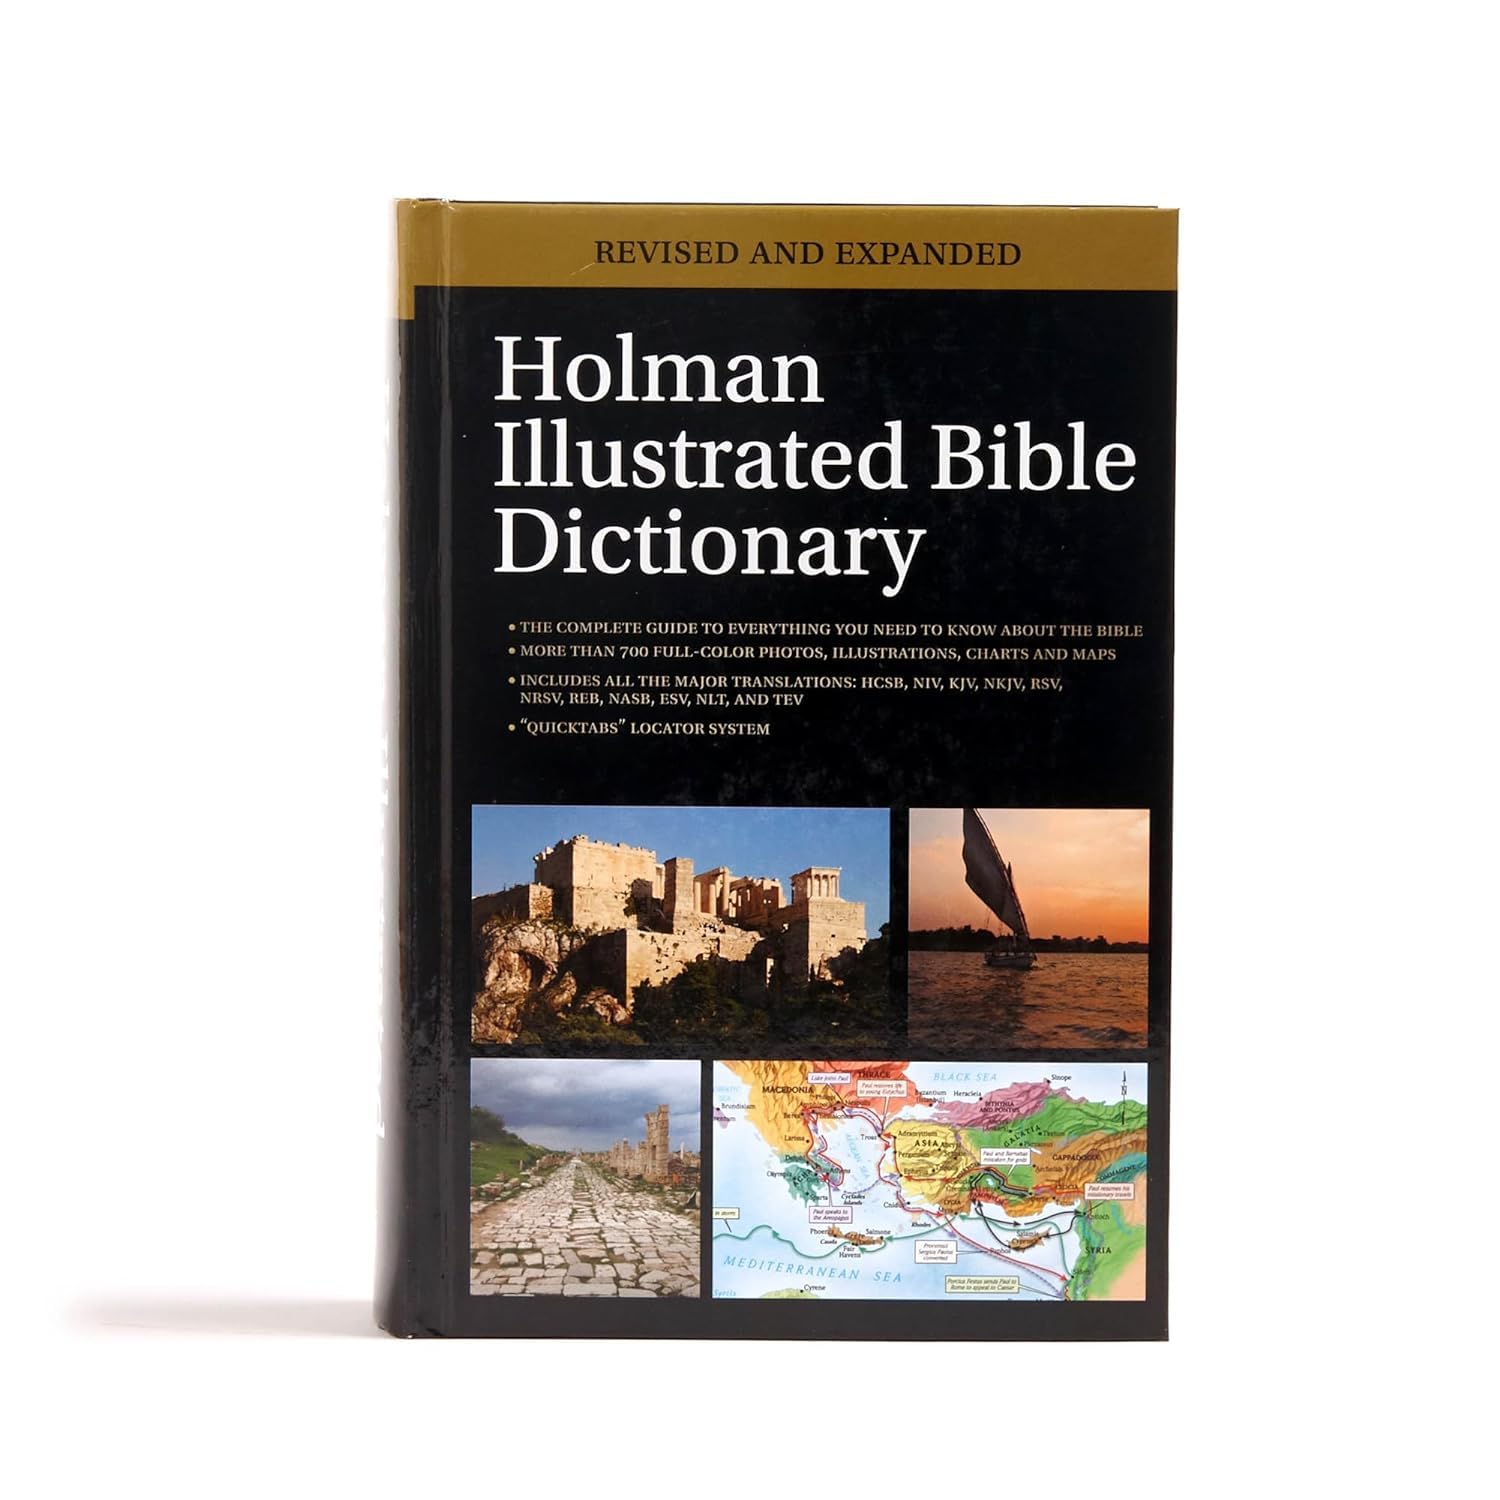 Holman Illustrated Bible Dictionary by Brand, Chad